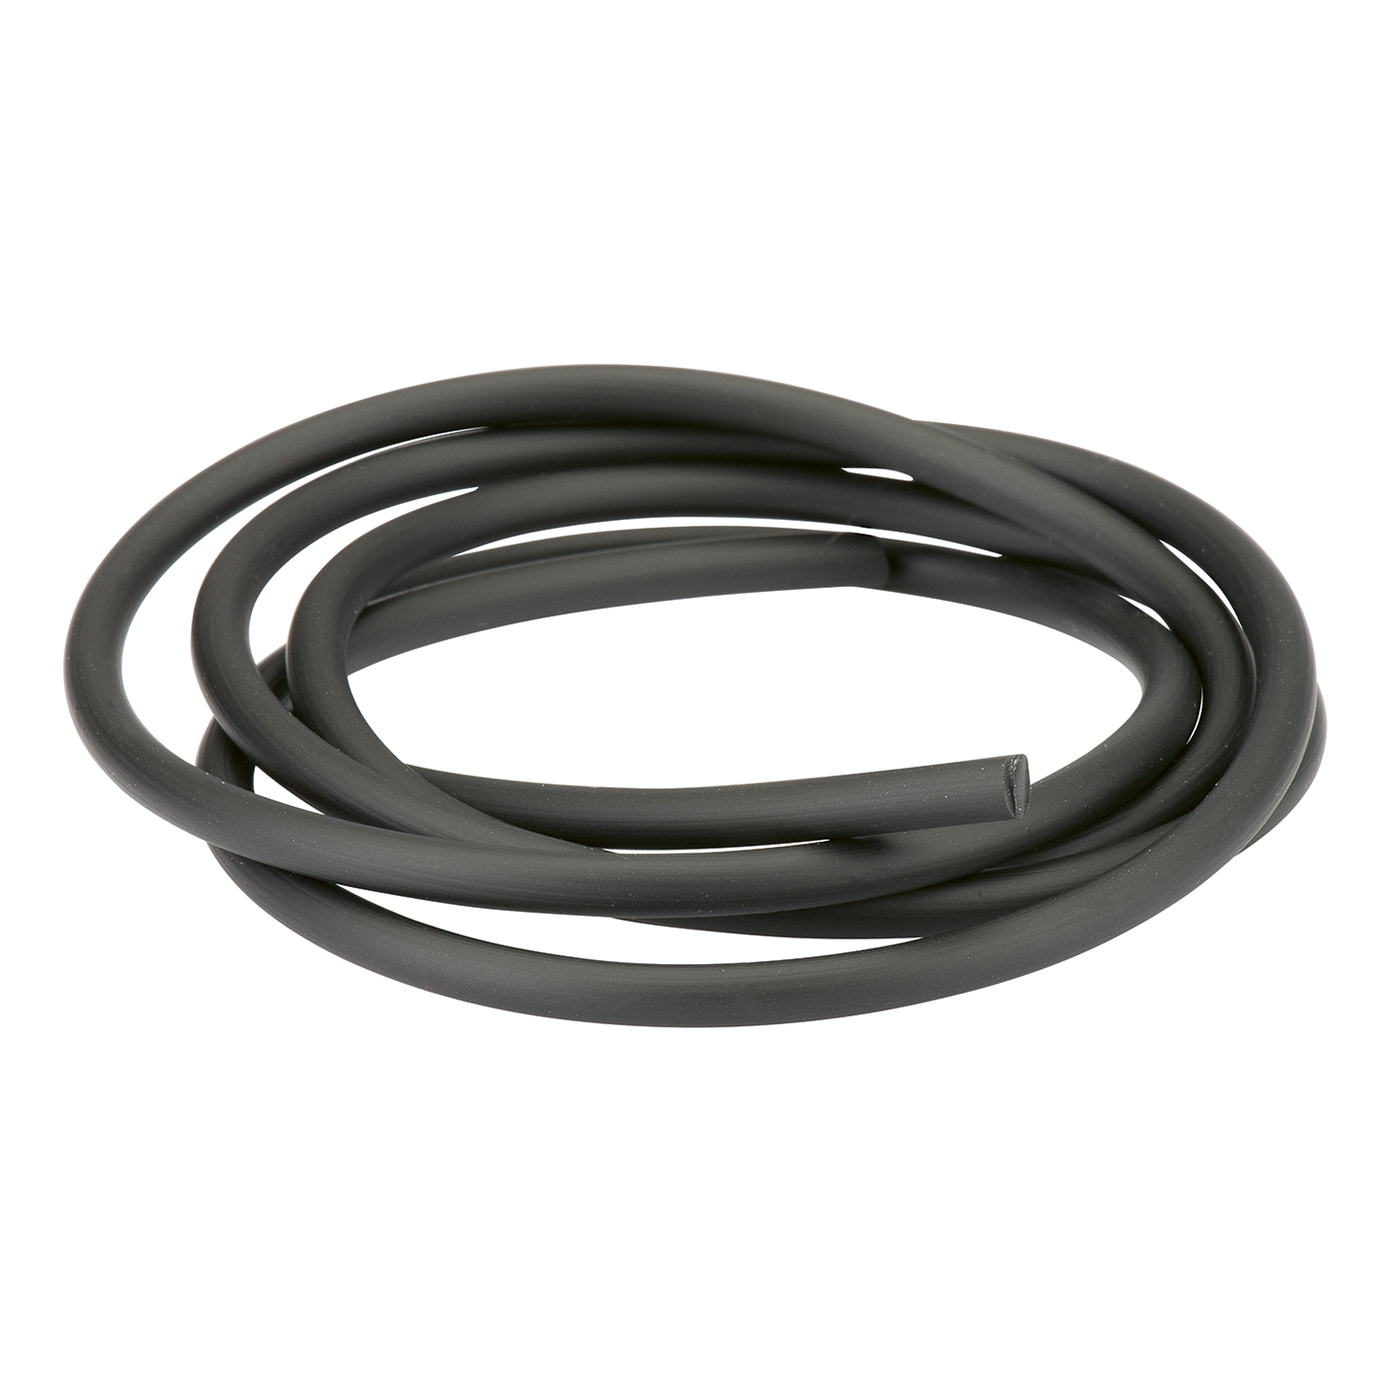 Rubber Cord, ø 4.0 mm, by the Meter - 1 m